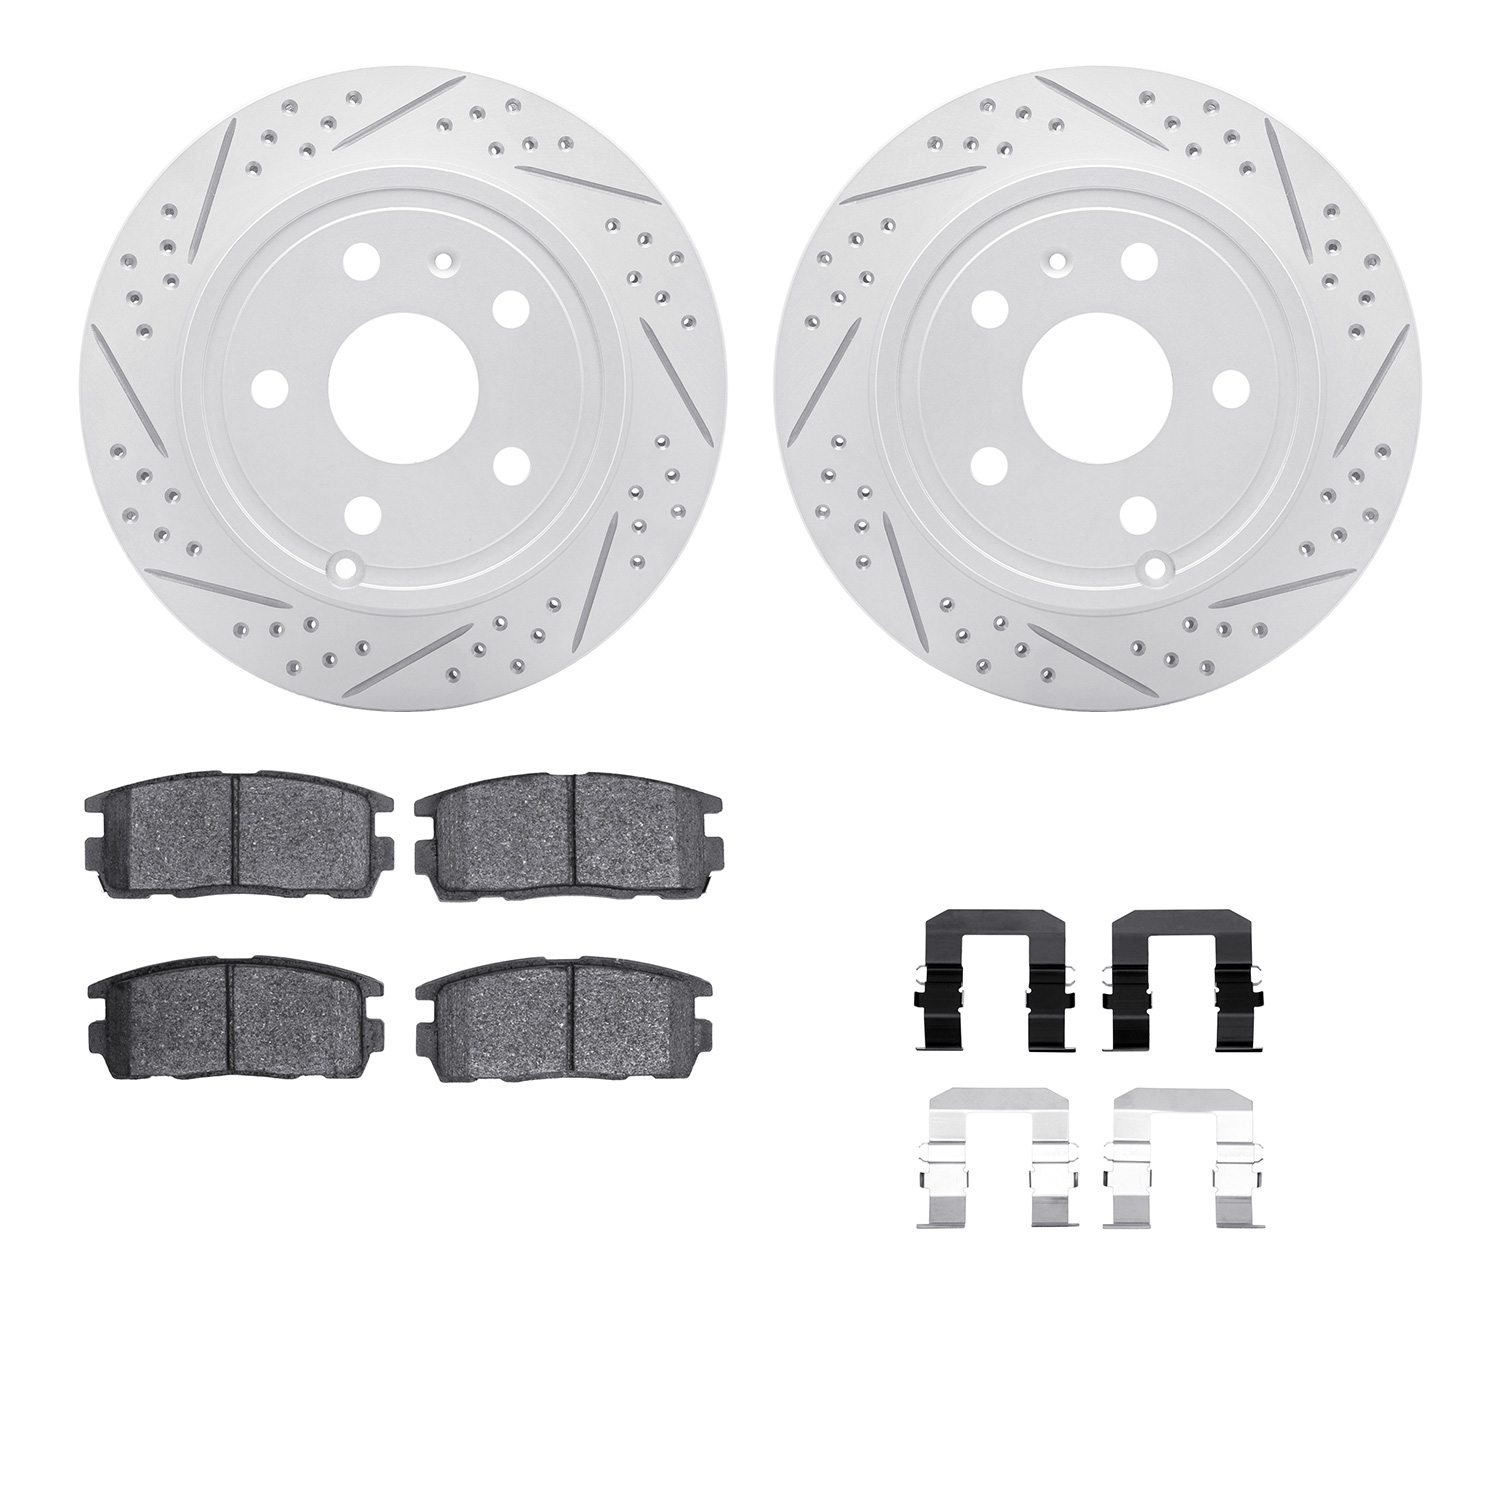 2512-48064 Geoperformance Drilled/Slotted Rotors w/5000 Advanced Brake Pads Kit & Hardware, 2010-2017 GM, Position: Rear